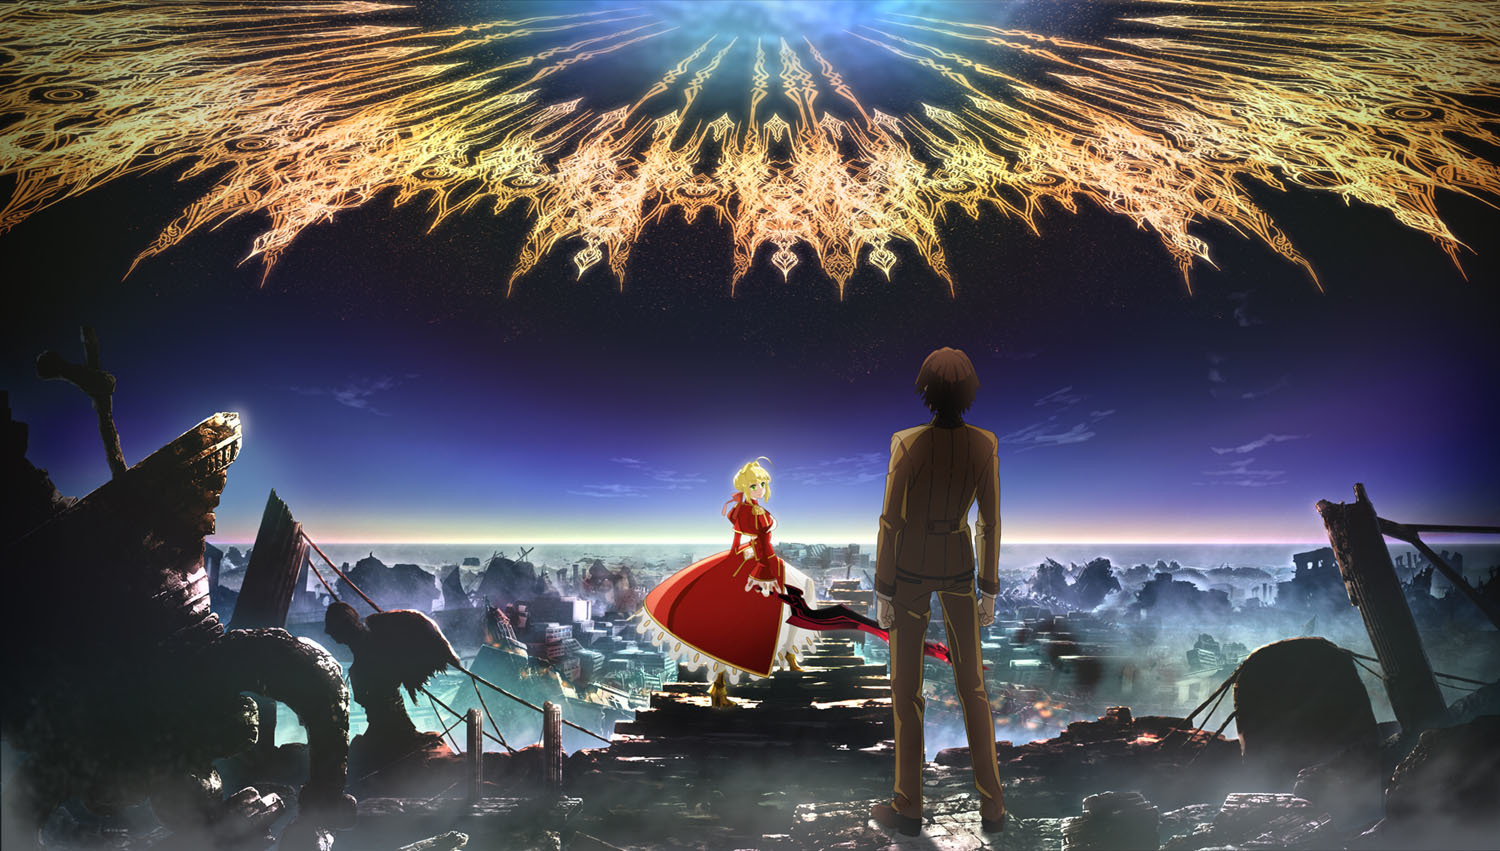 『Fate/EXTRA Last Encore』 © TYPE-MOON/Marvelous, Aniplex, Notes, SHAFT